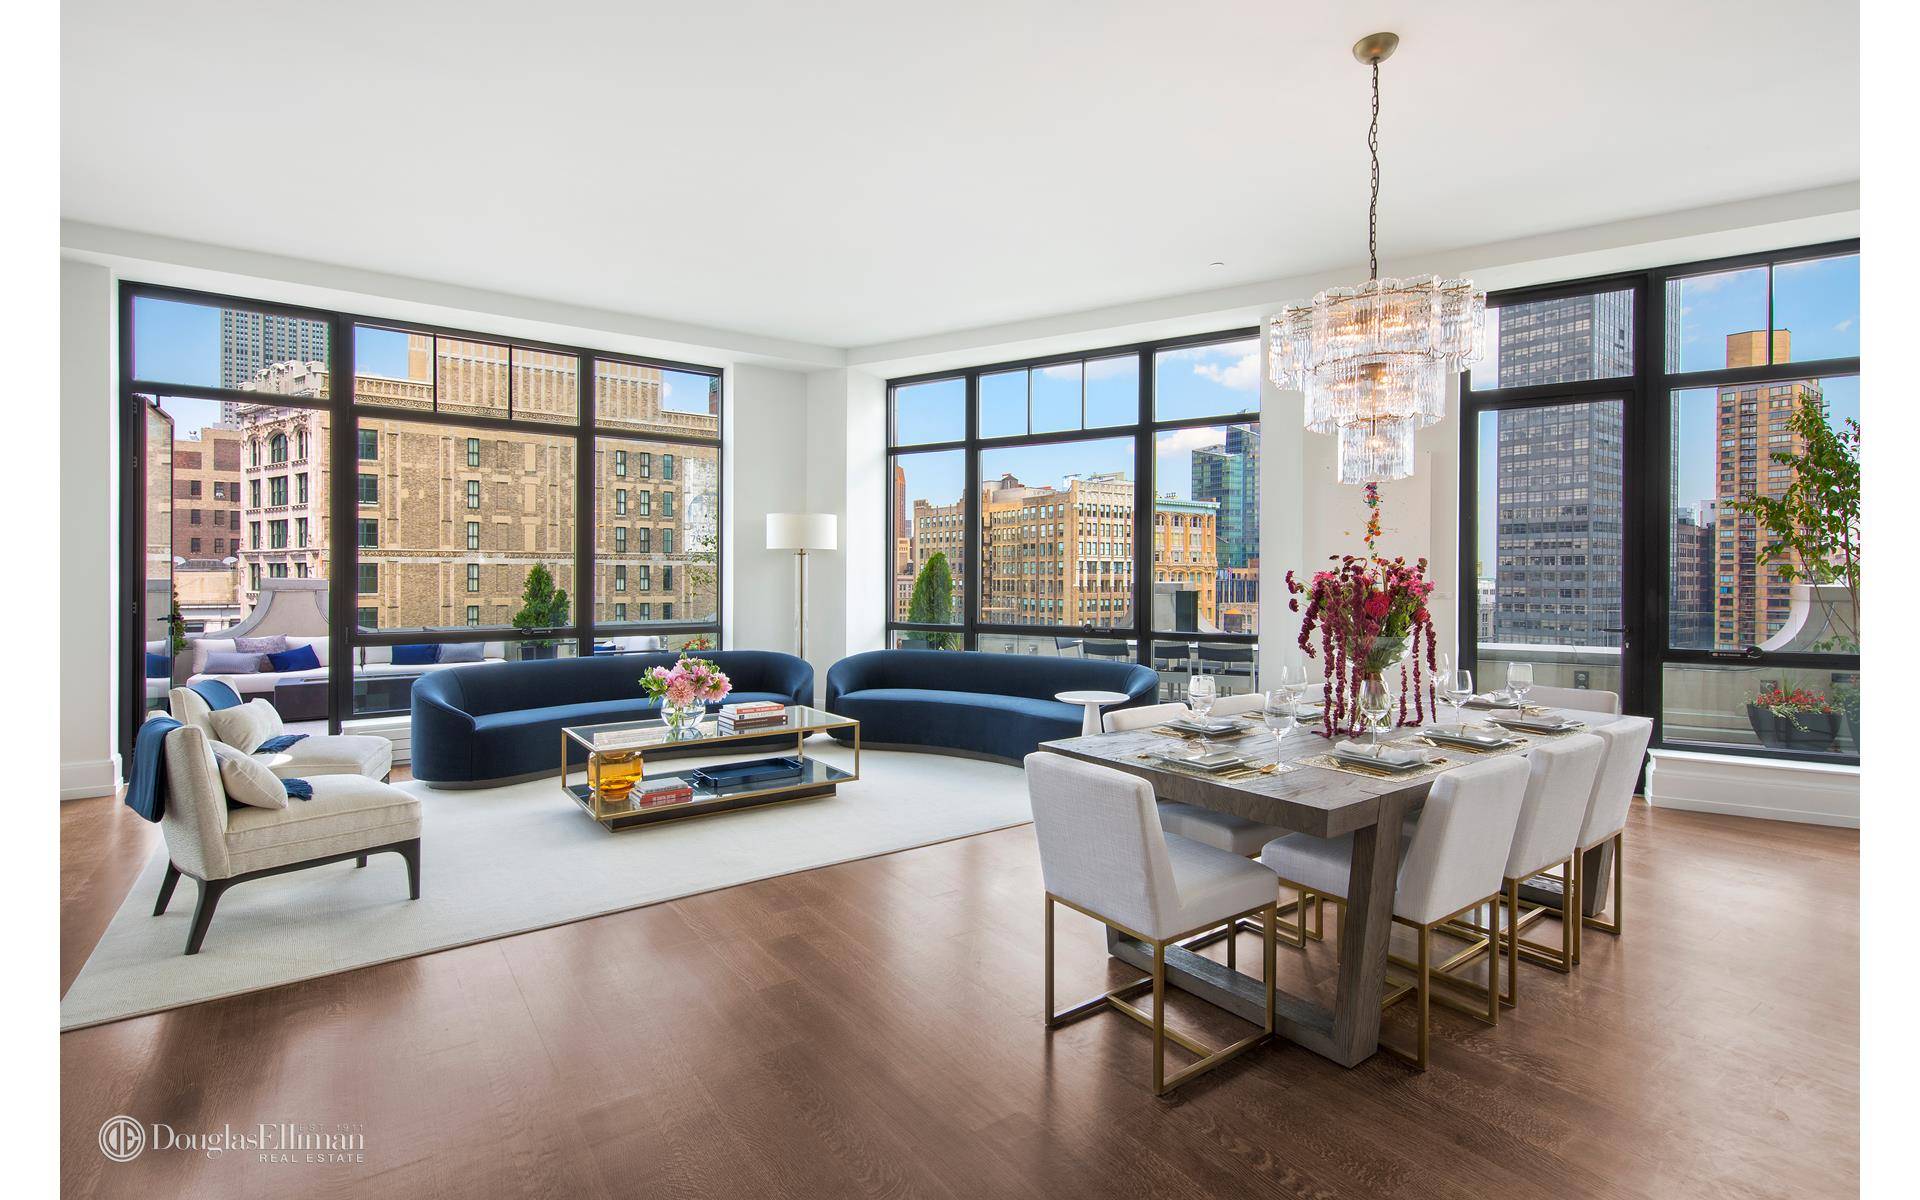 Dazzling 360 degree views provide a dramatic backdrop for this spectacular 2, 527 square foot 18th floor aerie at 10 Madison Square West, one of New York's most desirable addresses.